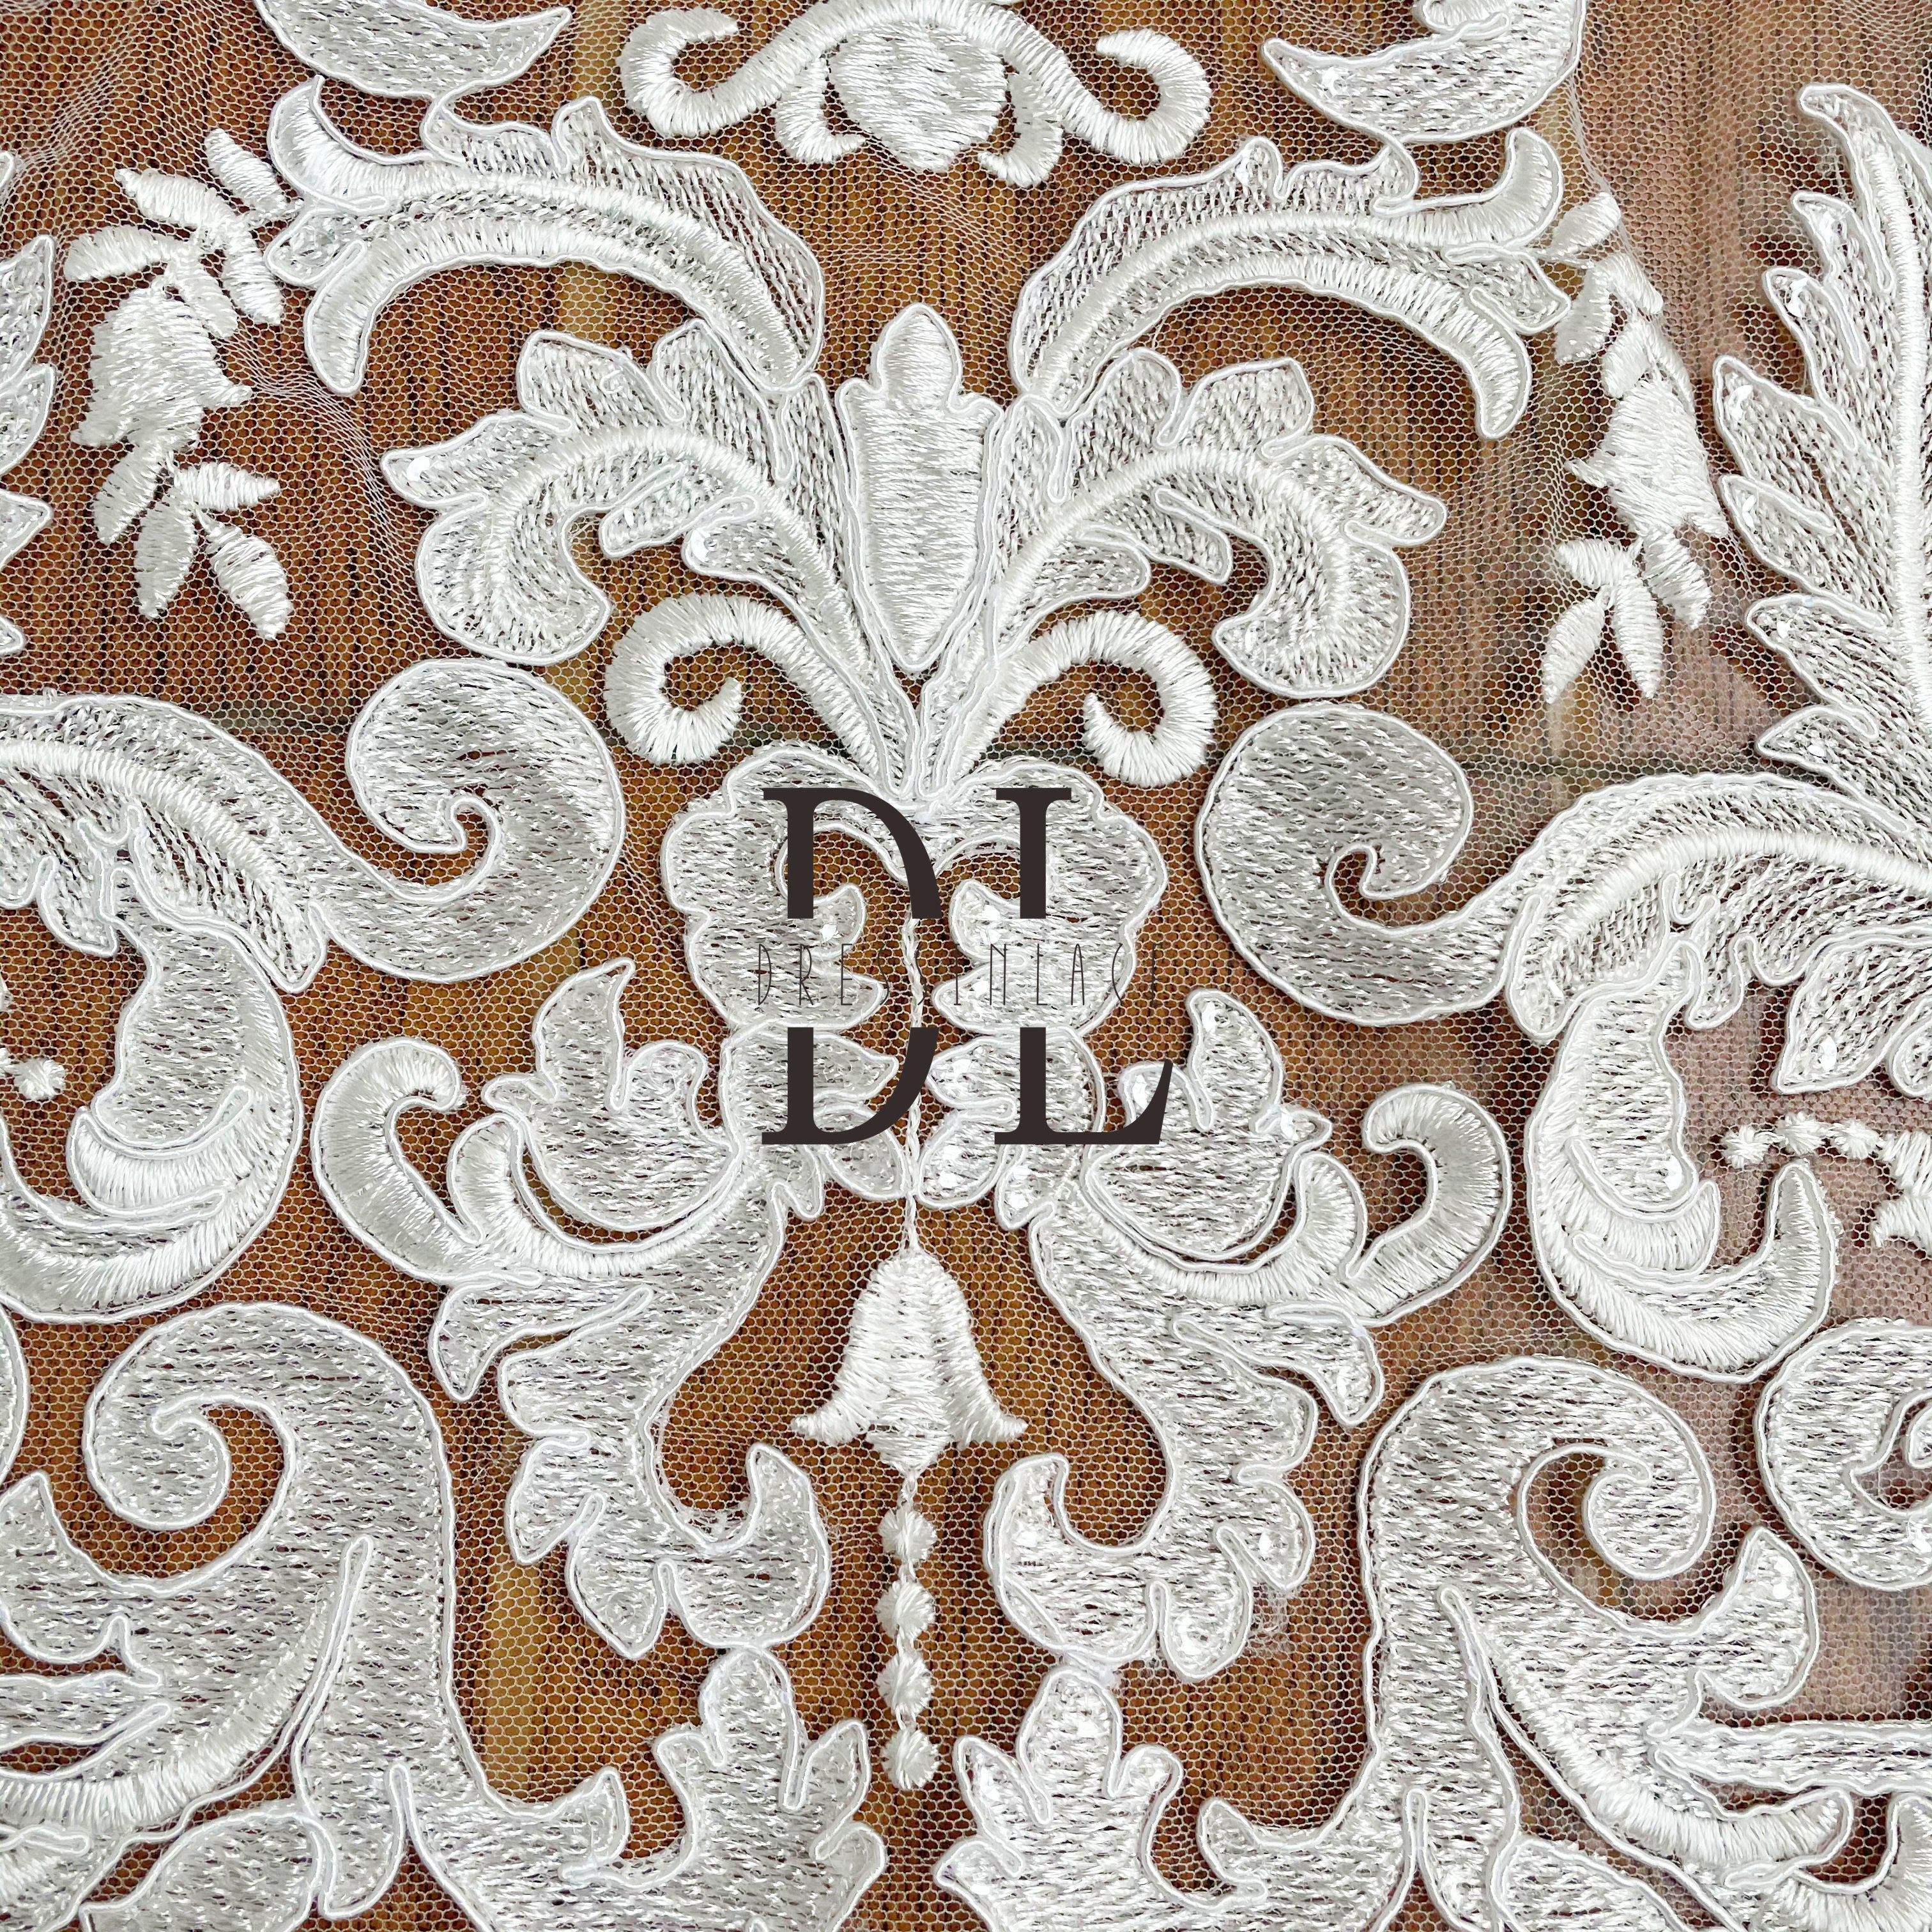 DL130116 Elegant Embroidery Lace Fabric with Sparkling Sequins - Perfect for Wedding Gowns DL130116